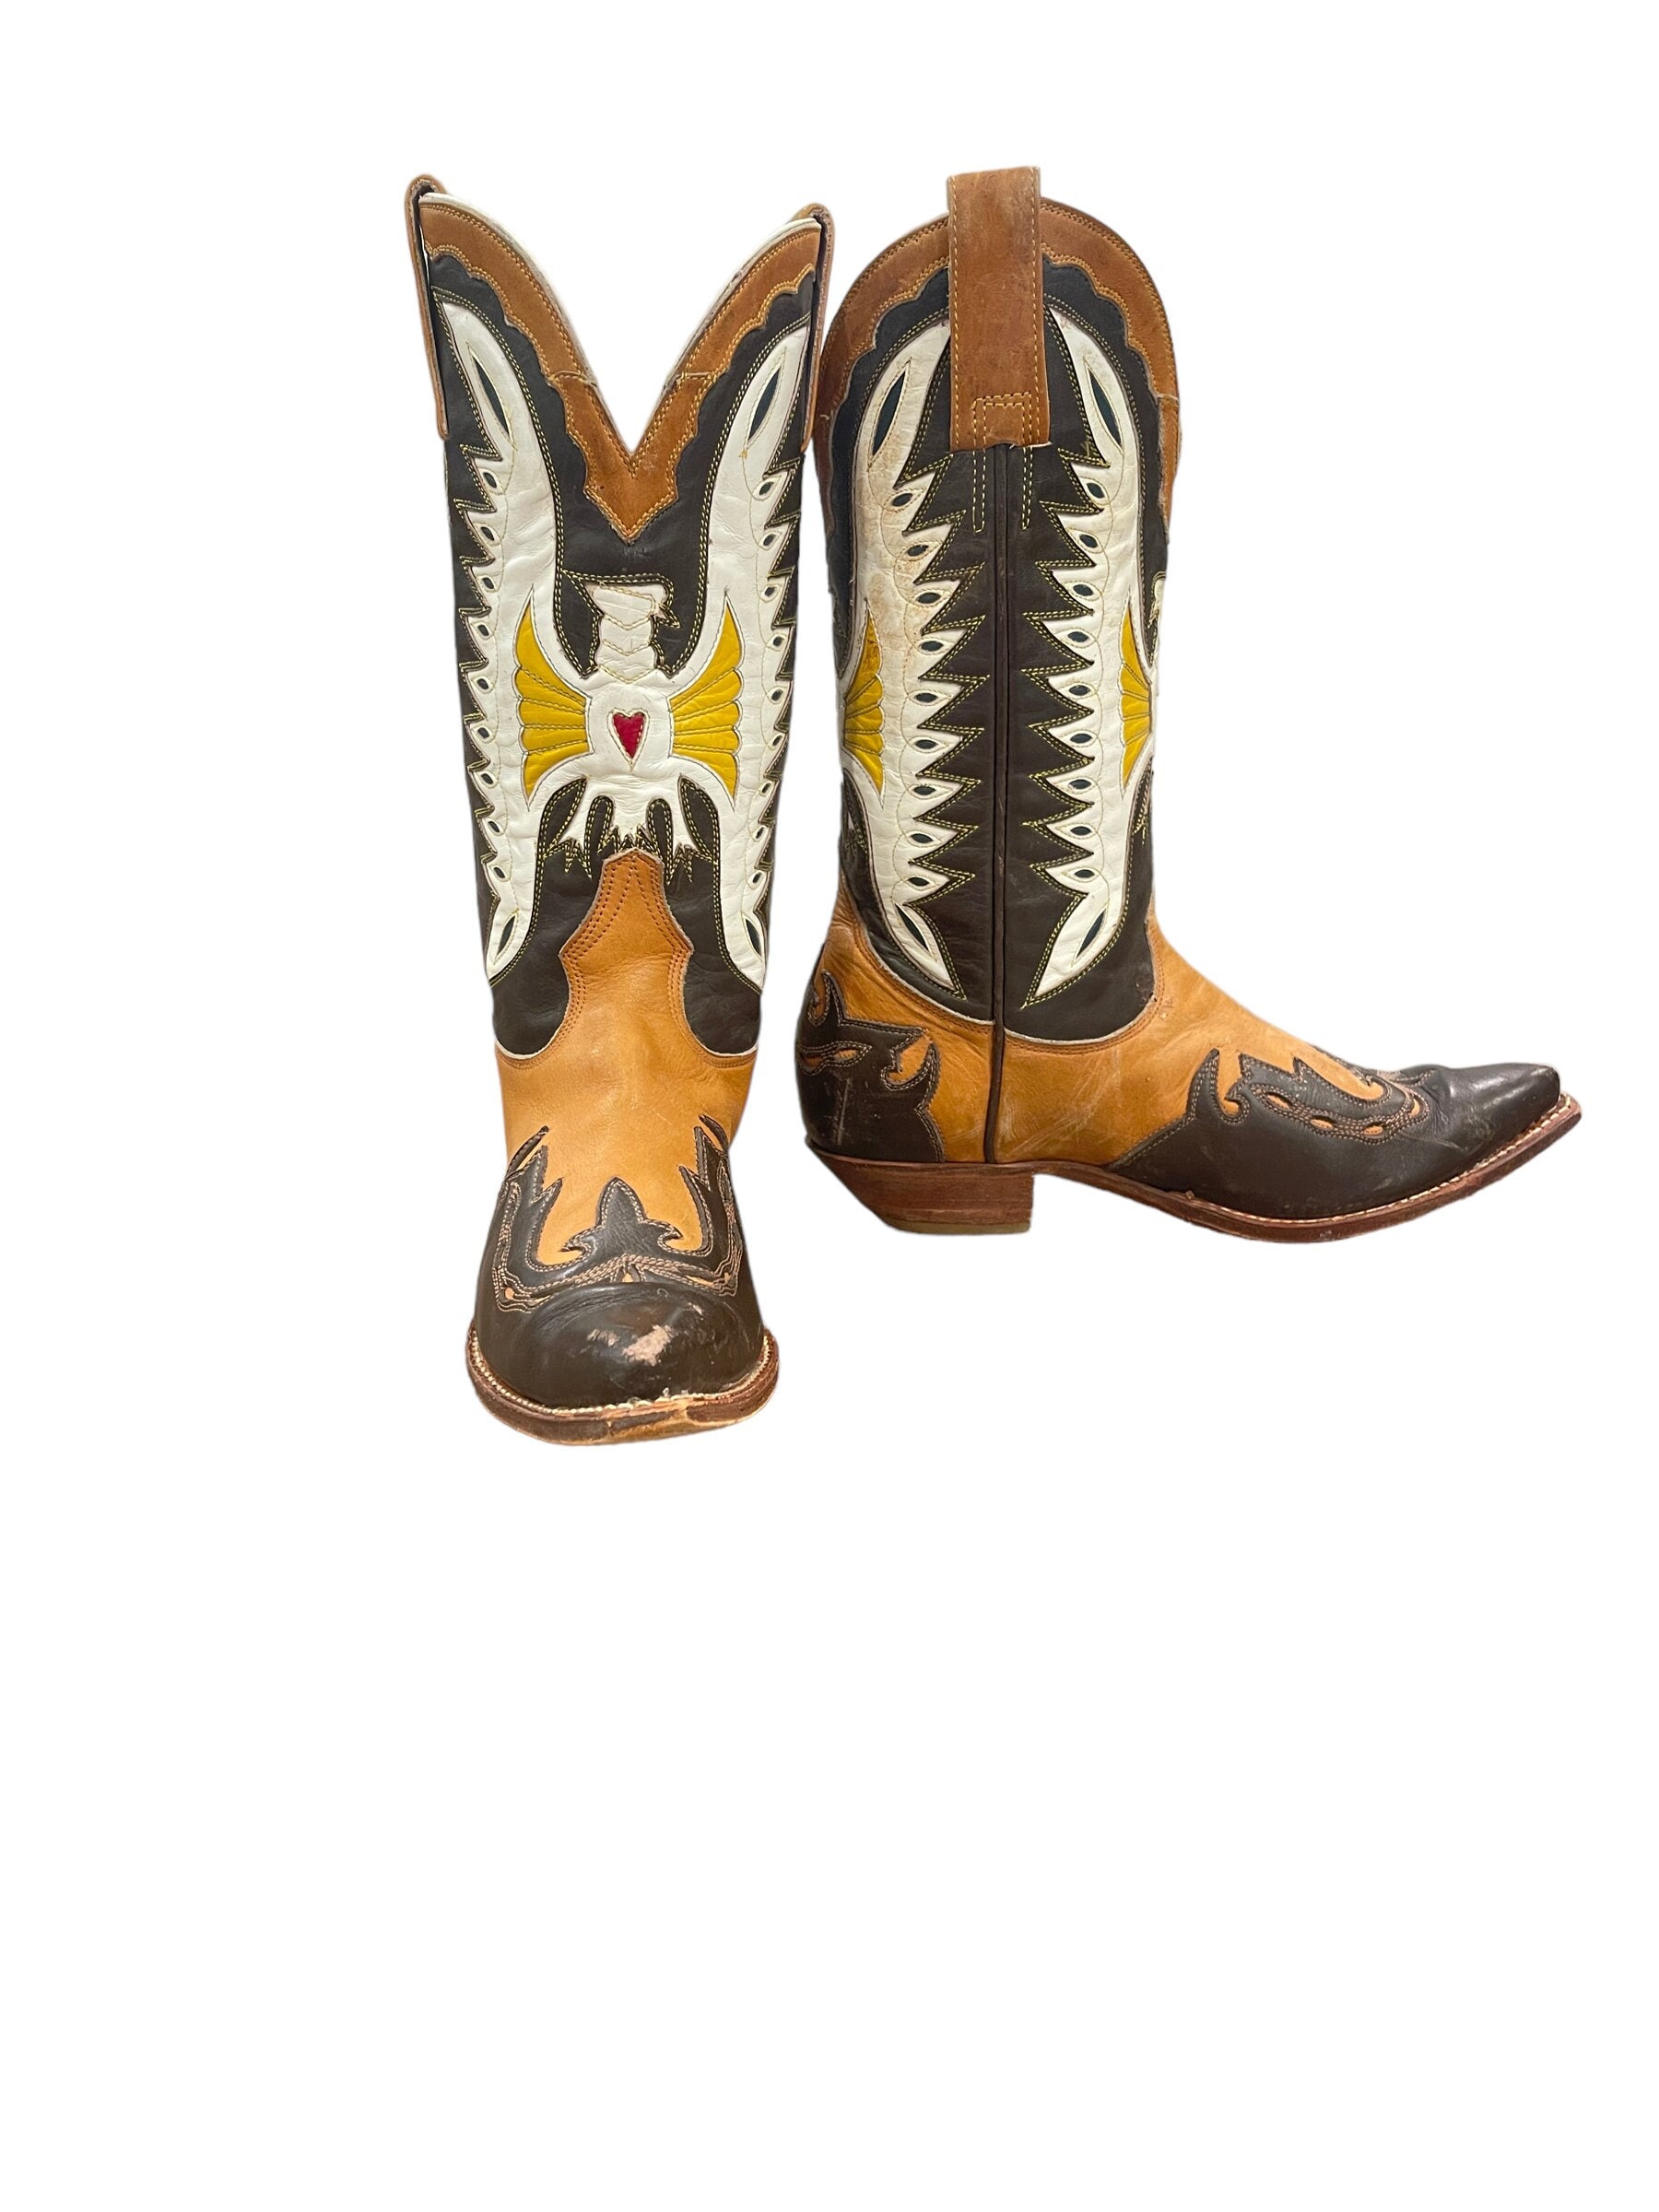 Size 8.5 M Don Quijote Womens Vintage Cowboy Western Boots - Etsy